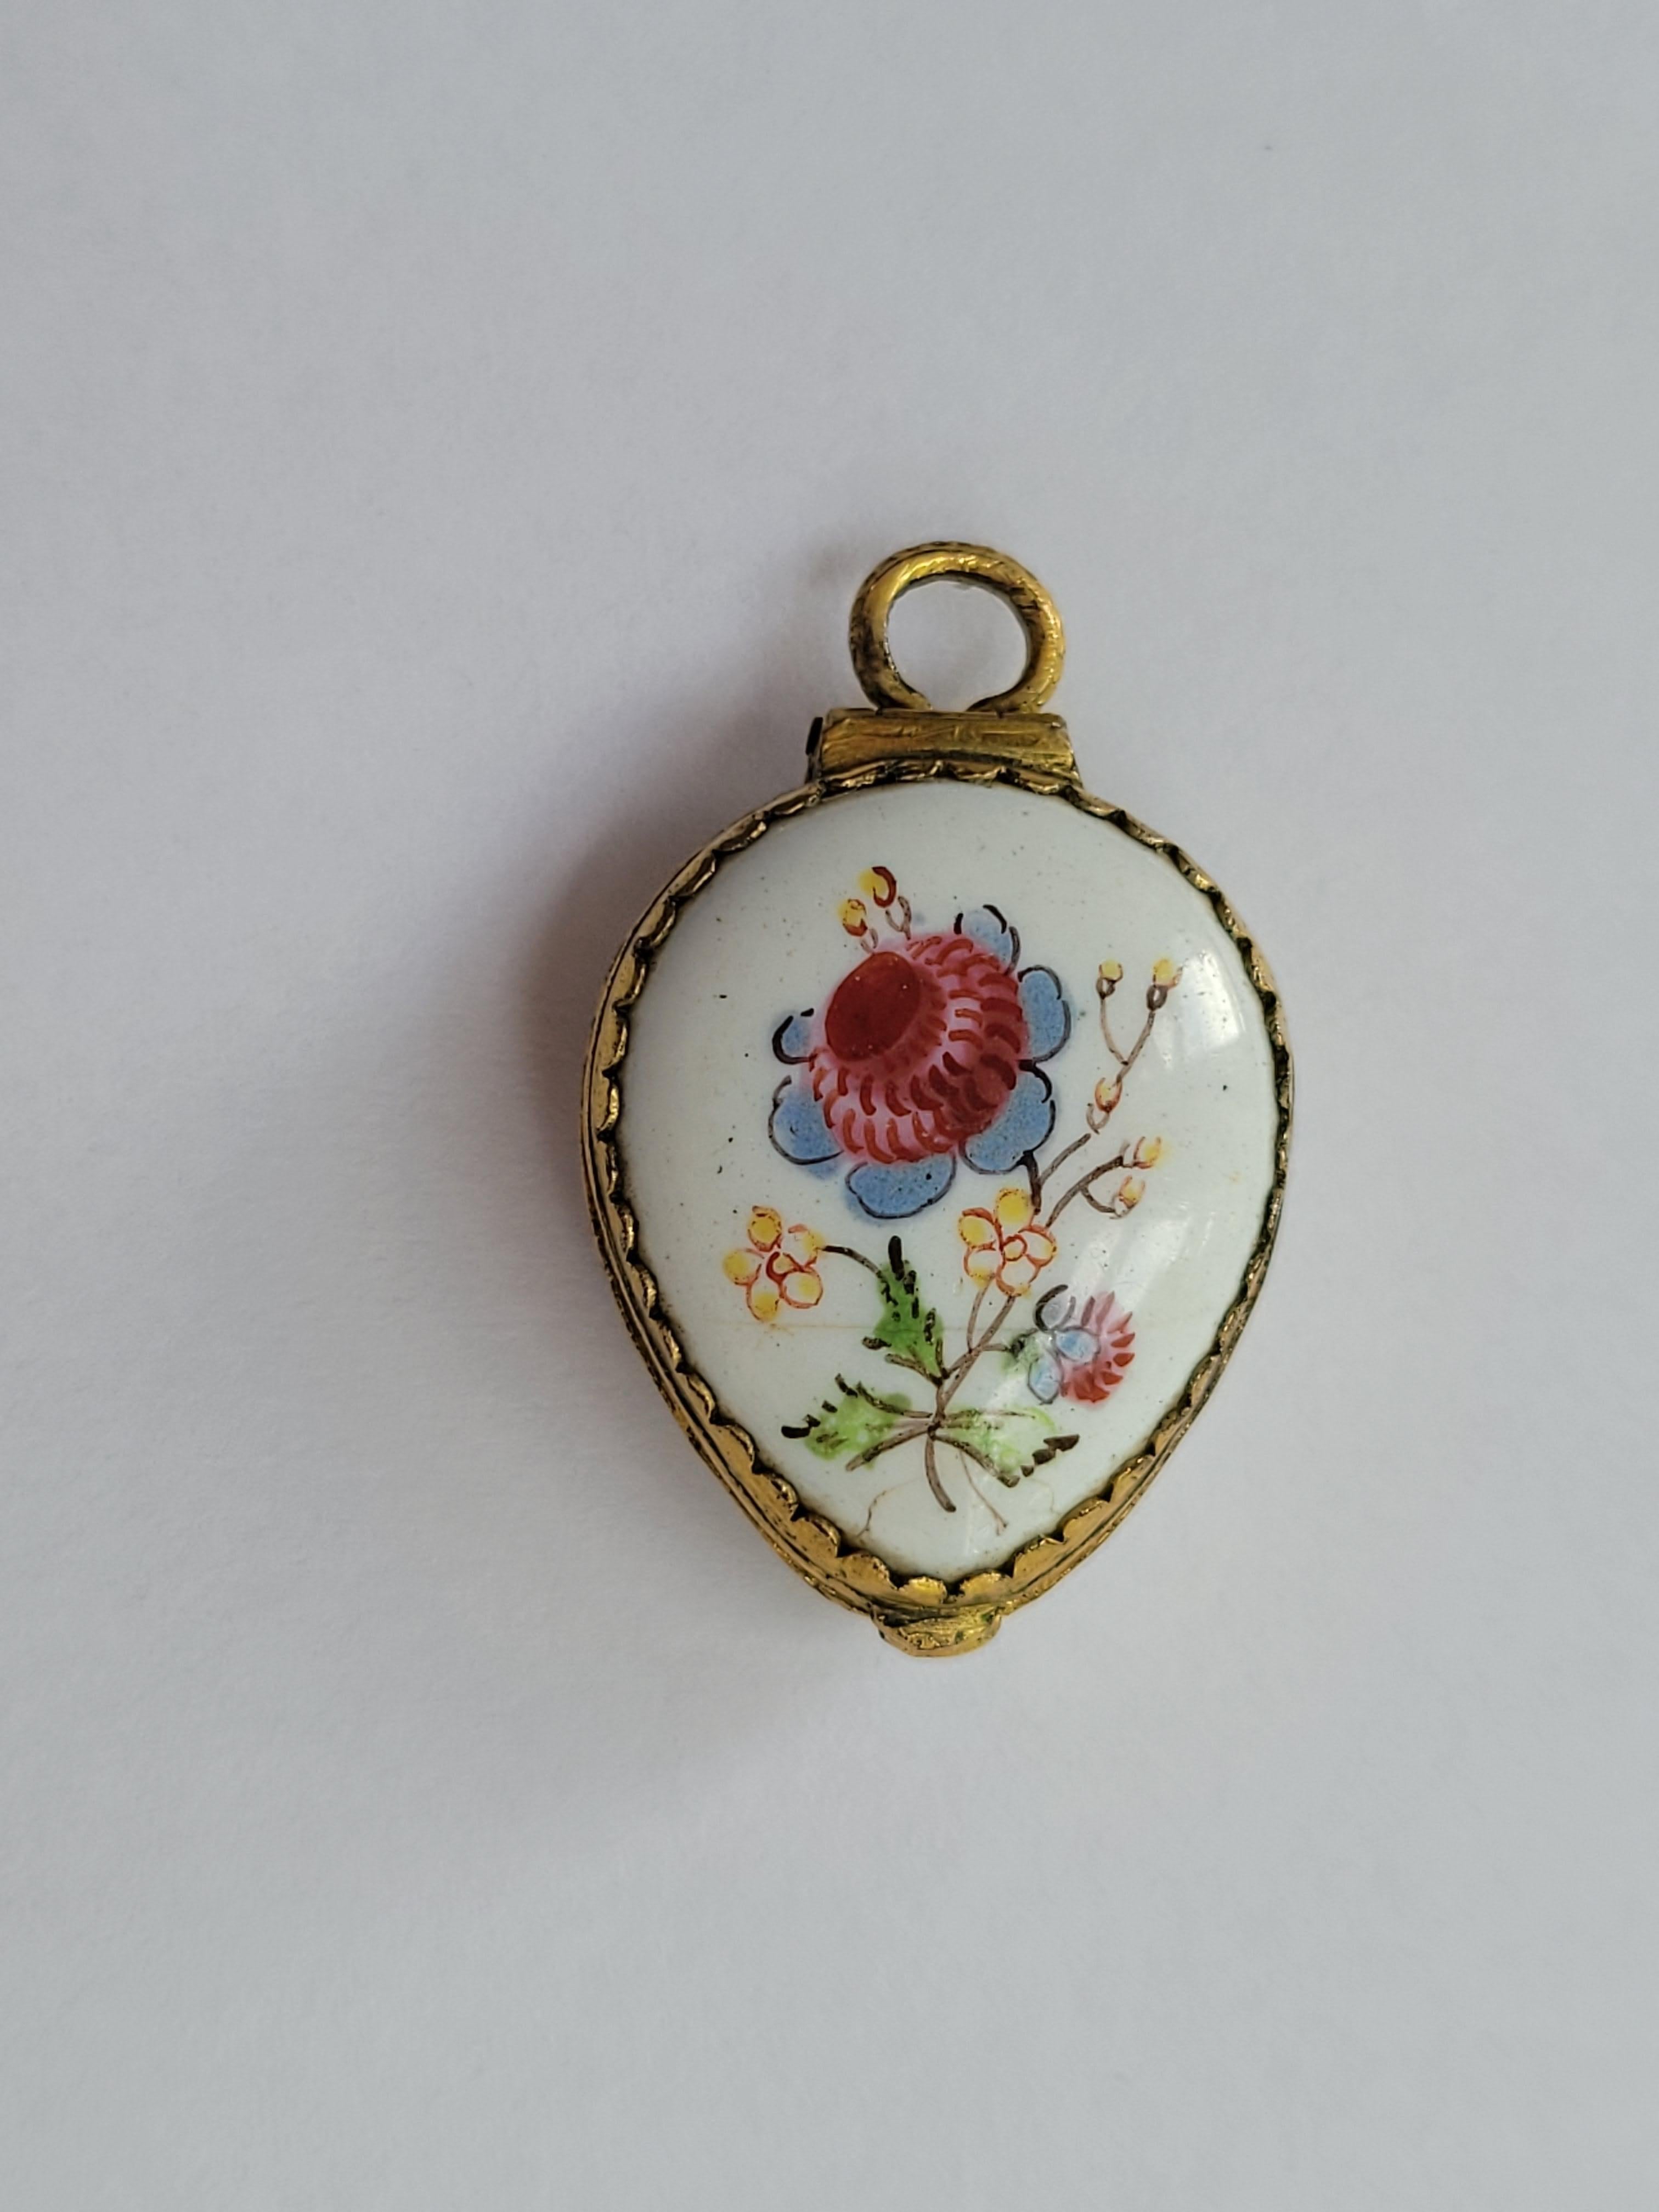 This enchanting Georgian c.1800 Bilston Battersea hand-painted enamel locket is a rare and captivating collector's item with deep English roots. Crafted in the shape of a heart, adorned with traditional floral motifs, it exudes timeless elegance.